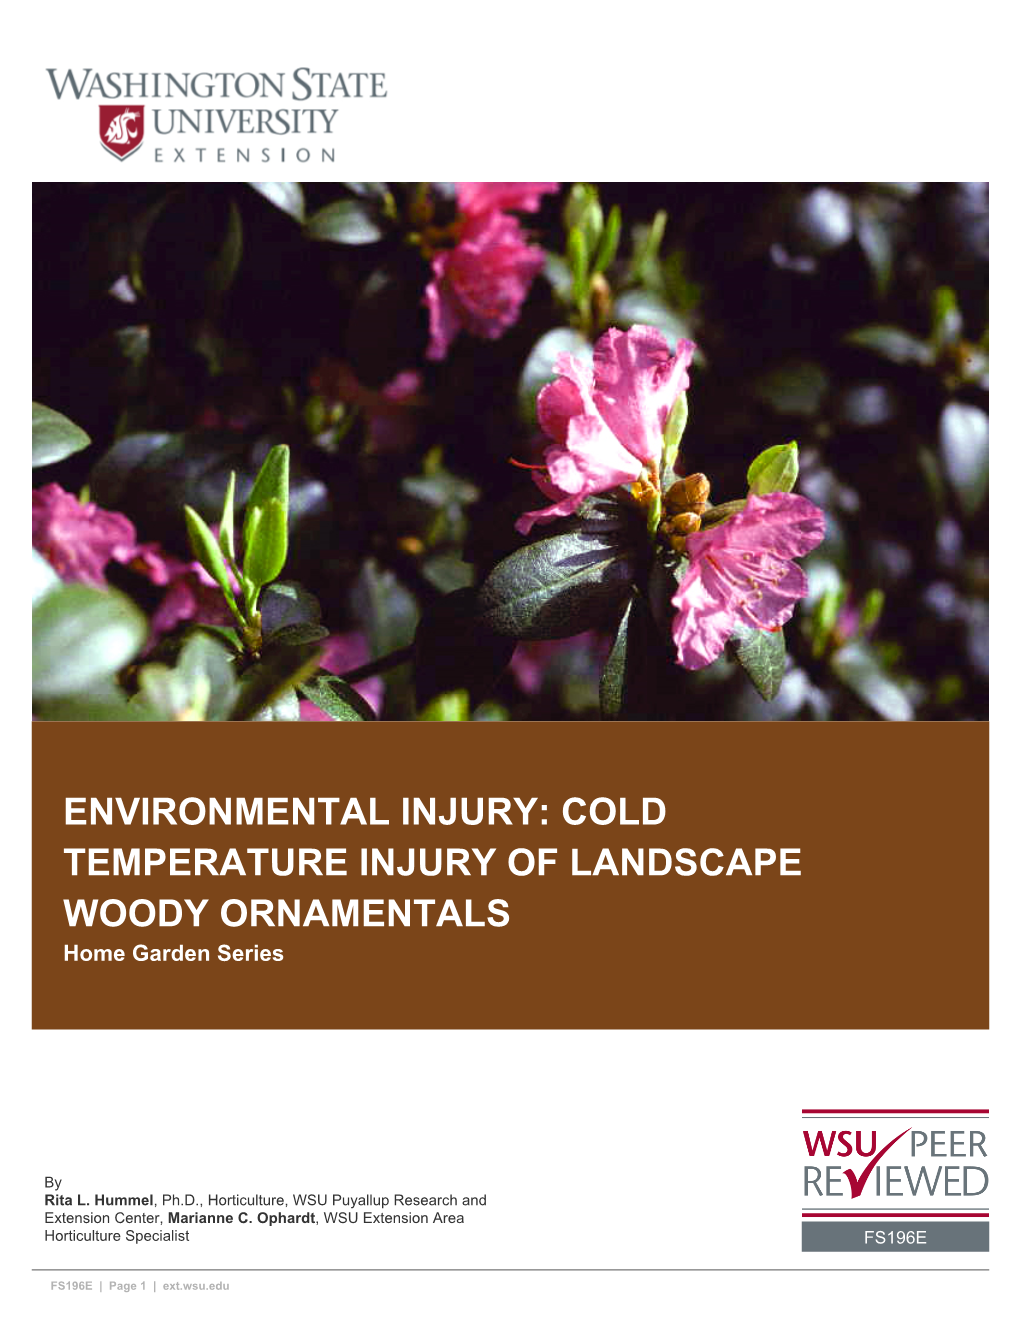 COLD TEMPERATURE INJURY of LANDSCAPE WOODY ORNAMENTALS Home Garden Series